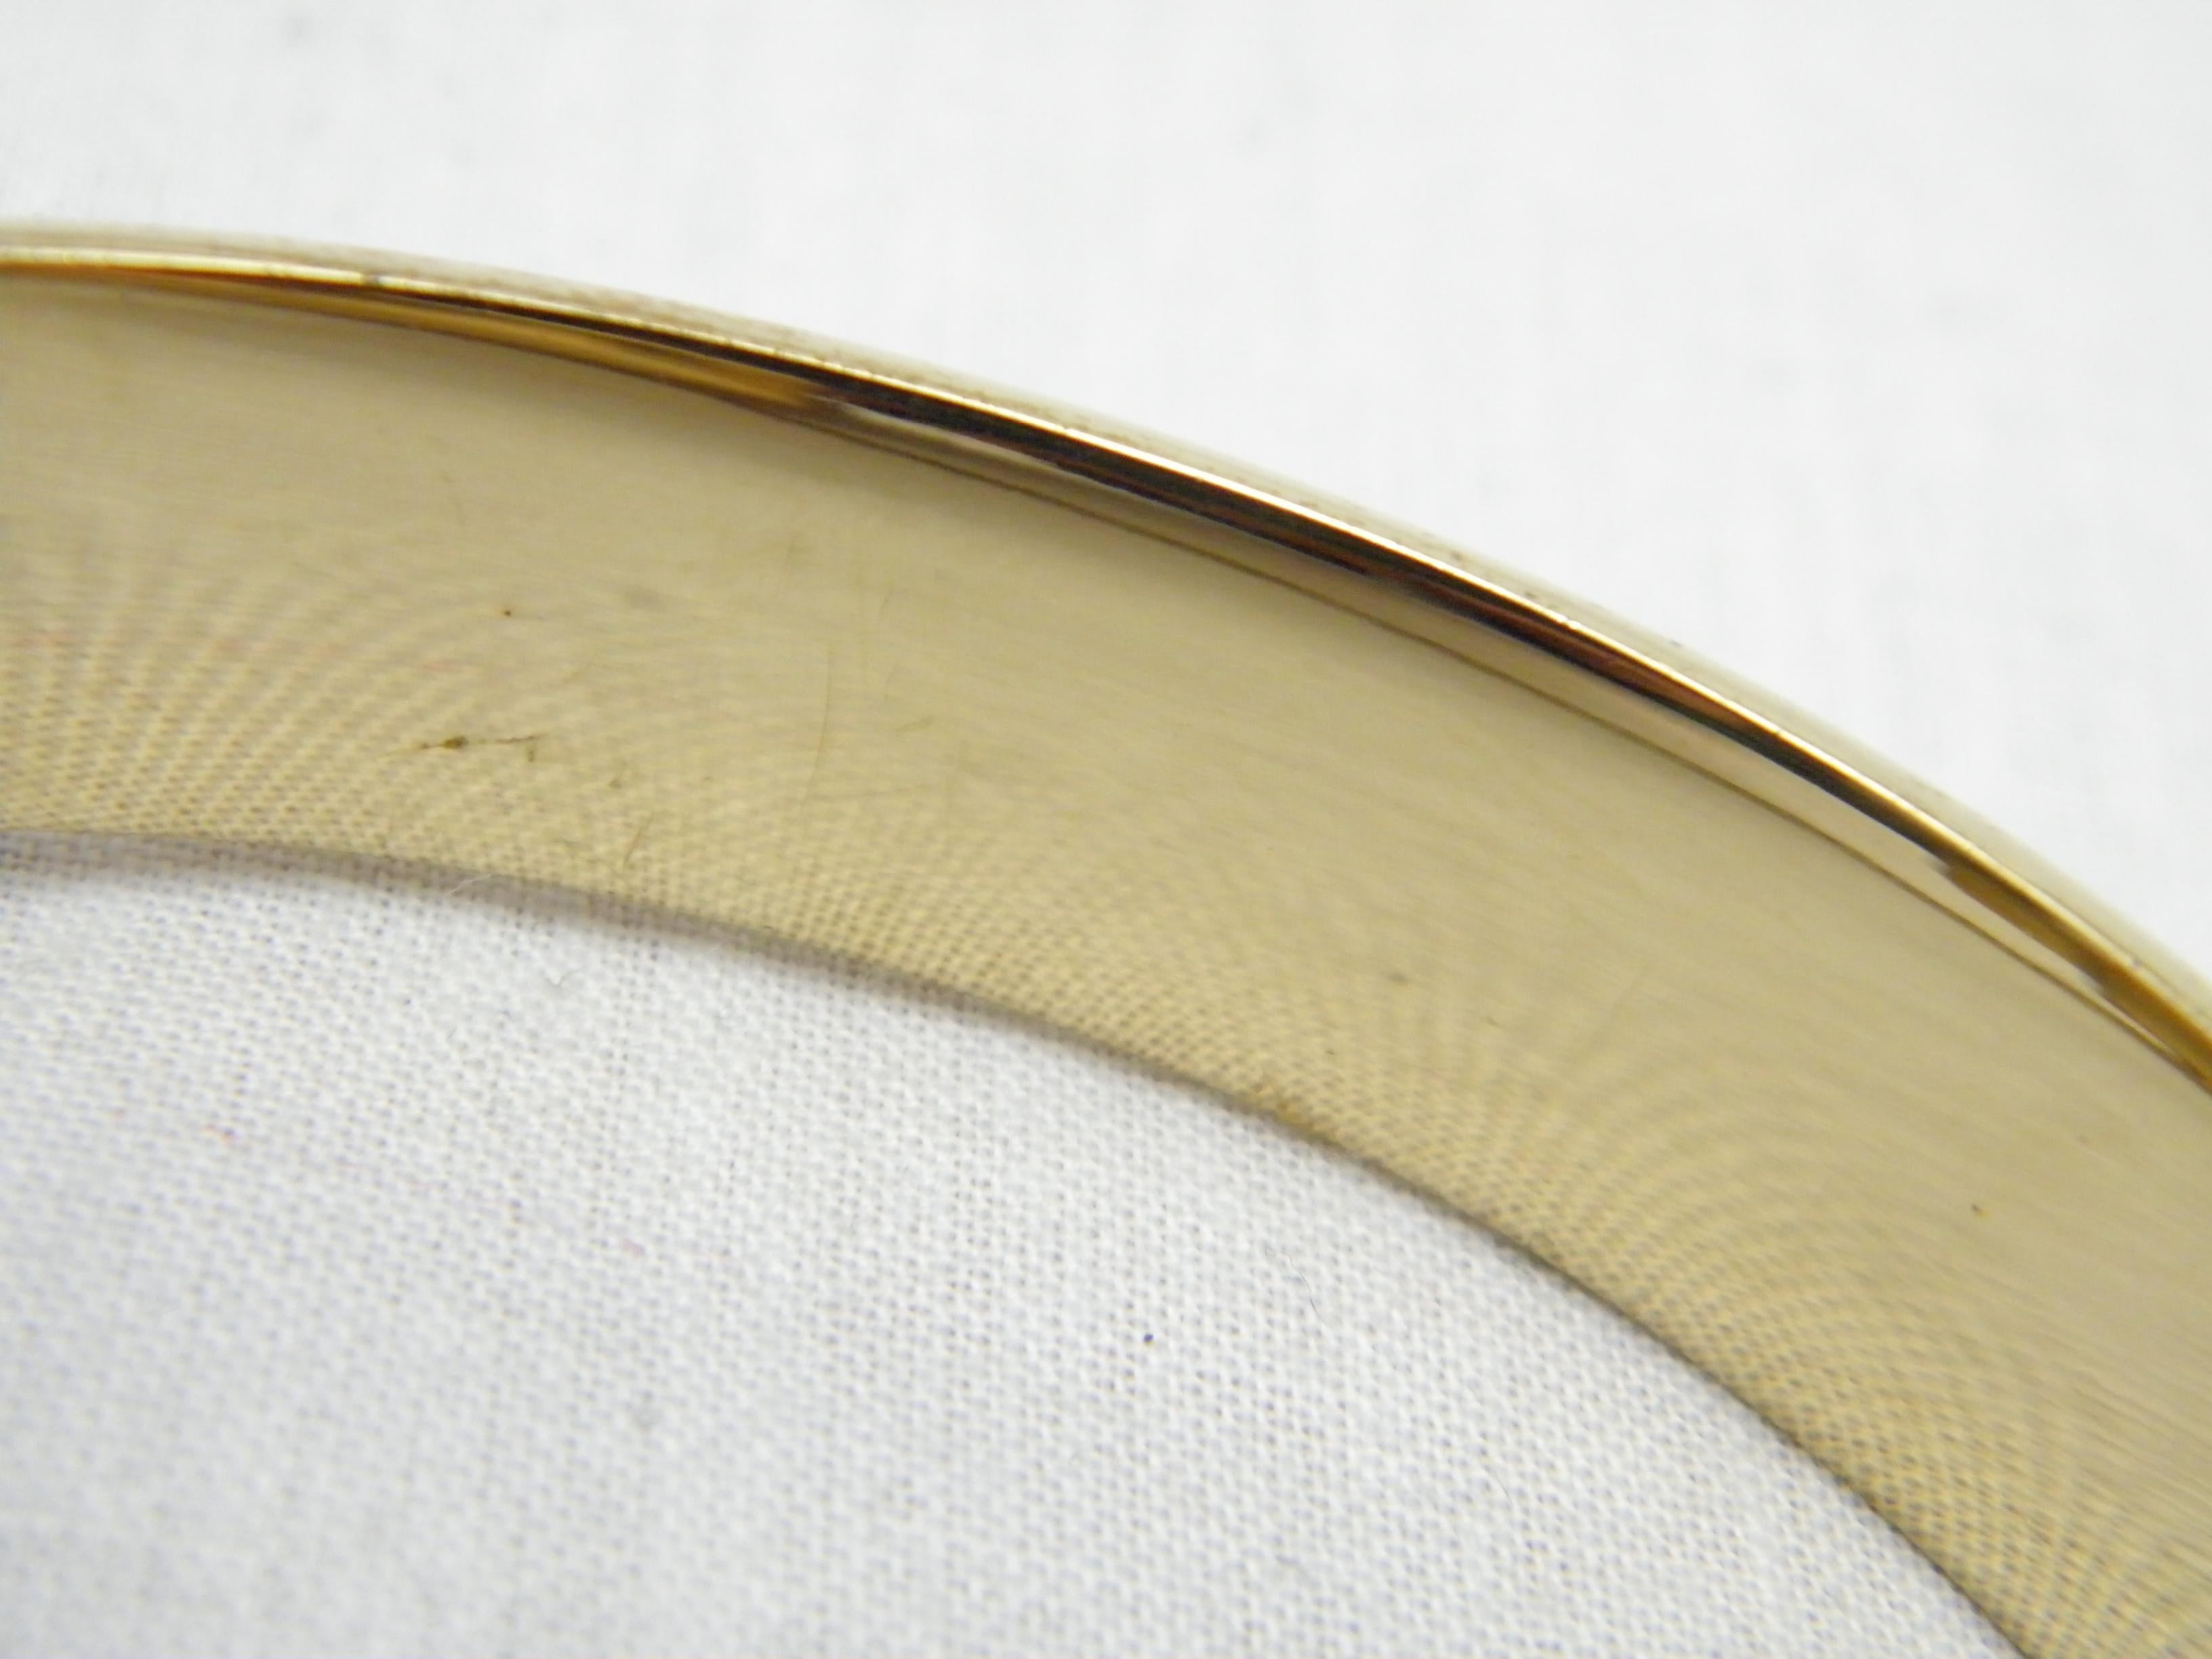 Vintage 12ct Gold 'Rolled' Floral Cuff Bracelet Bangle 500 Purity Heavy 21g For Sale 3